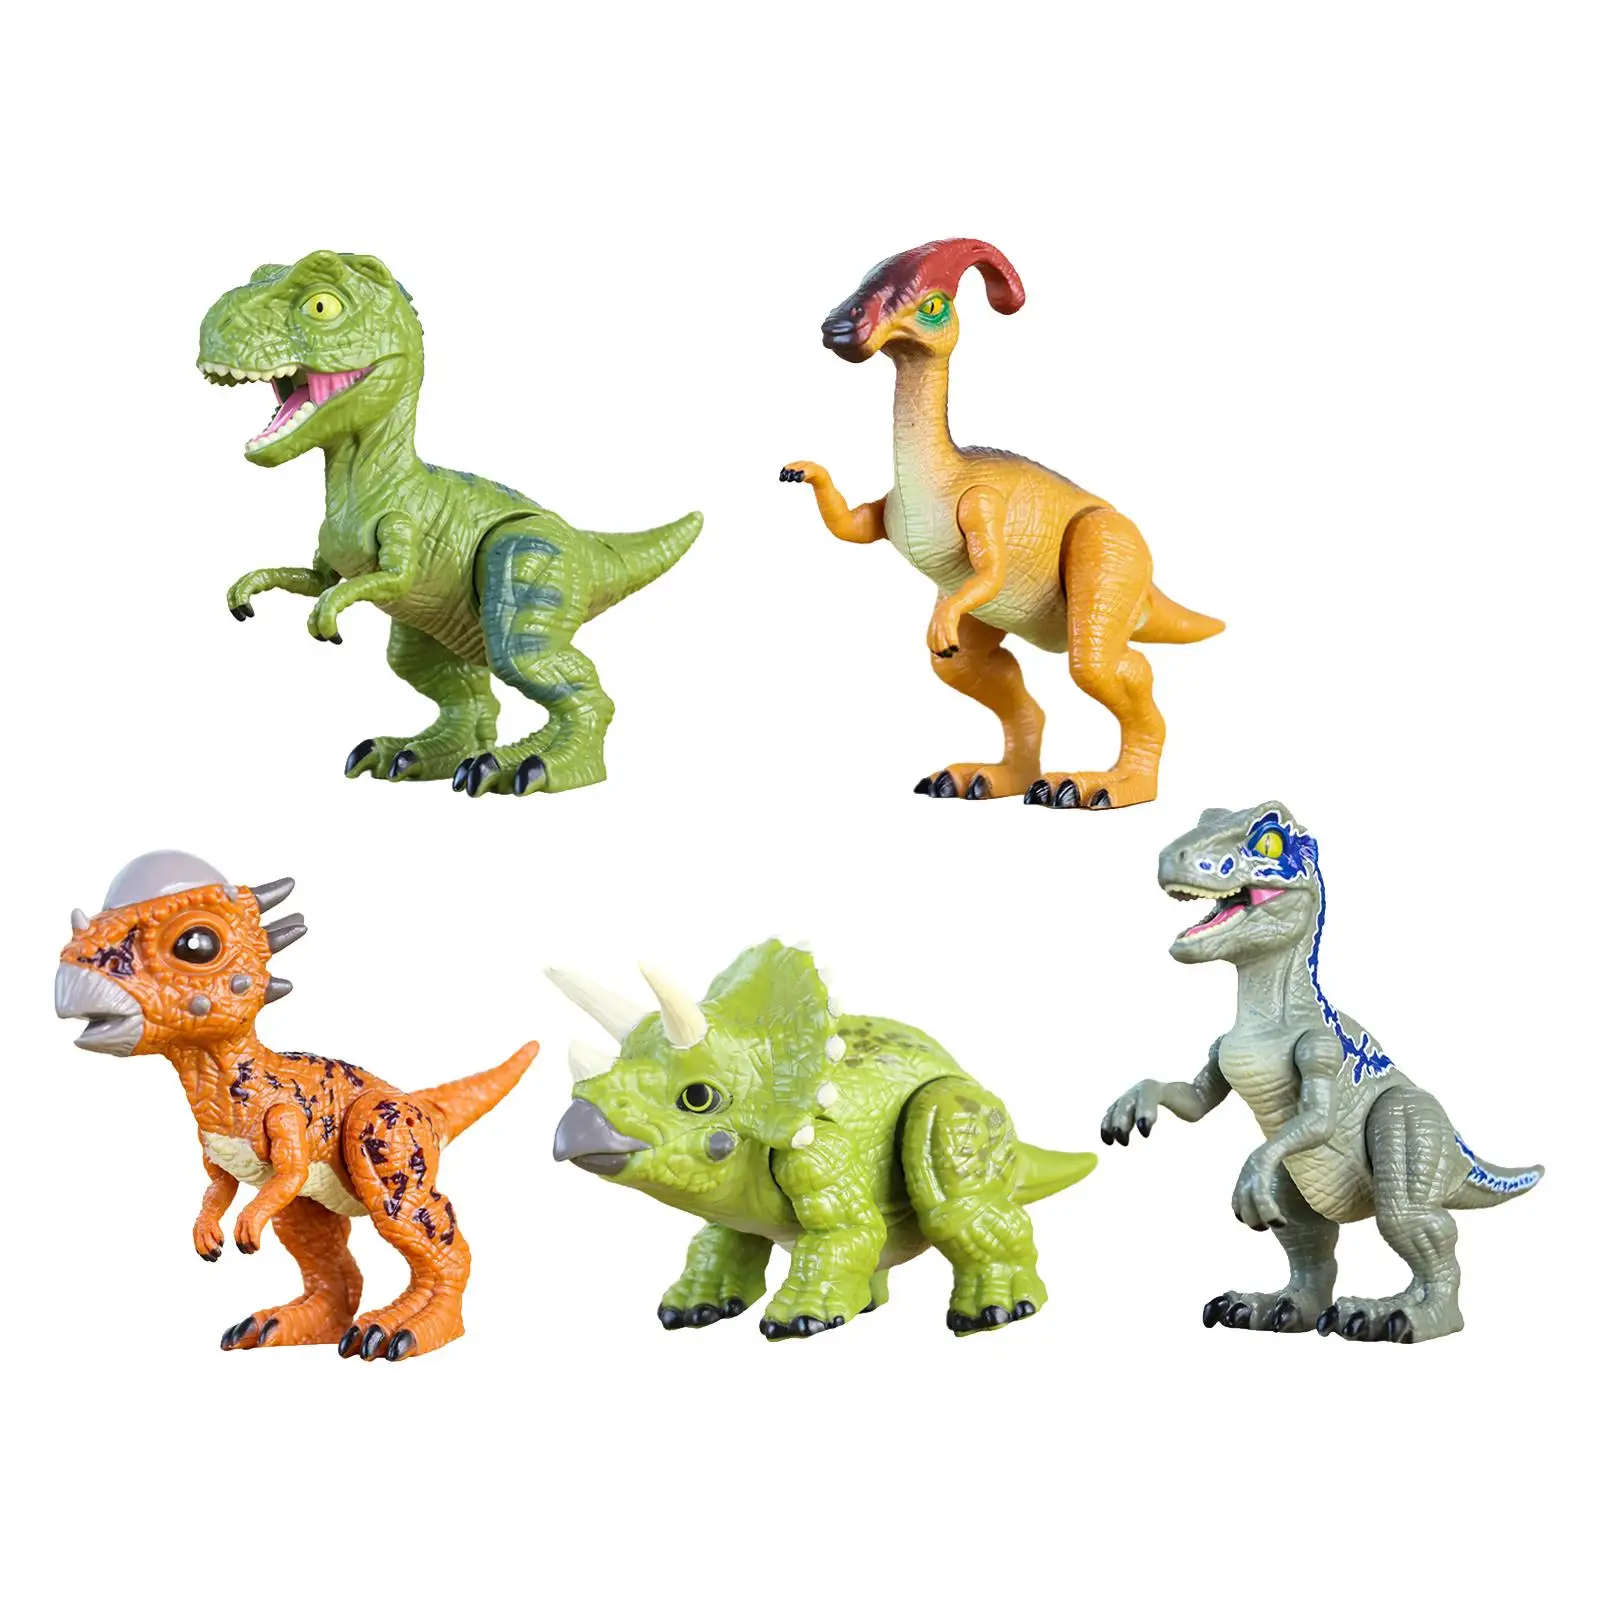 Dinosaur Figure Toy Simulated Dinosaur Toy Figurine Animal Model Movable Joints for Party Favors Pretend Cake Topper